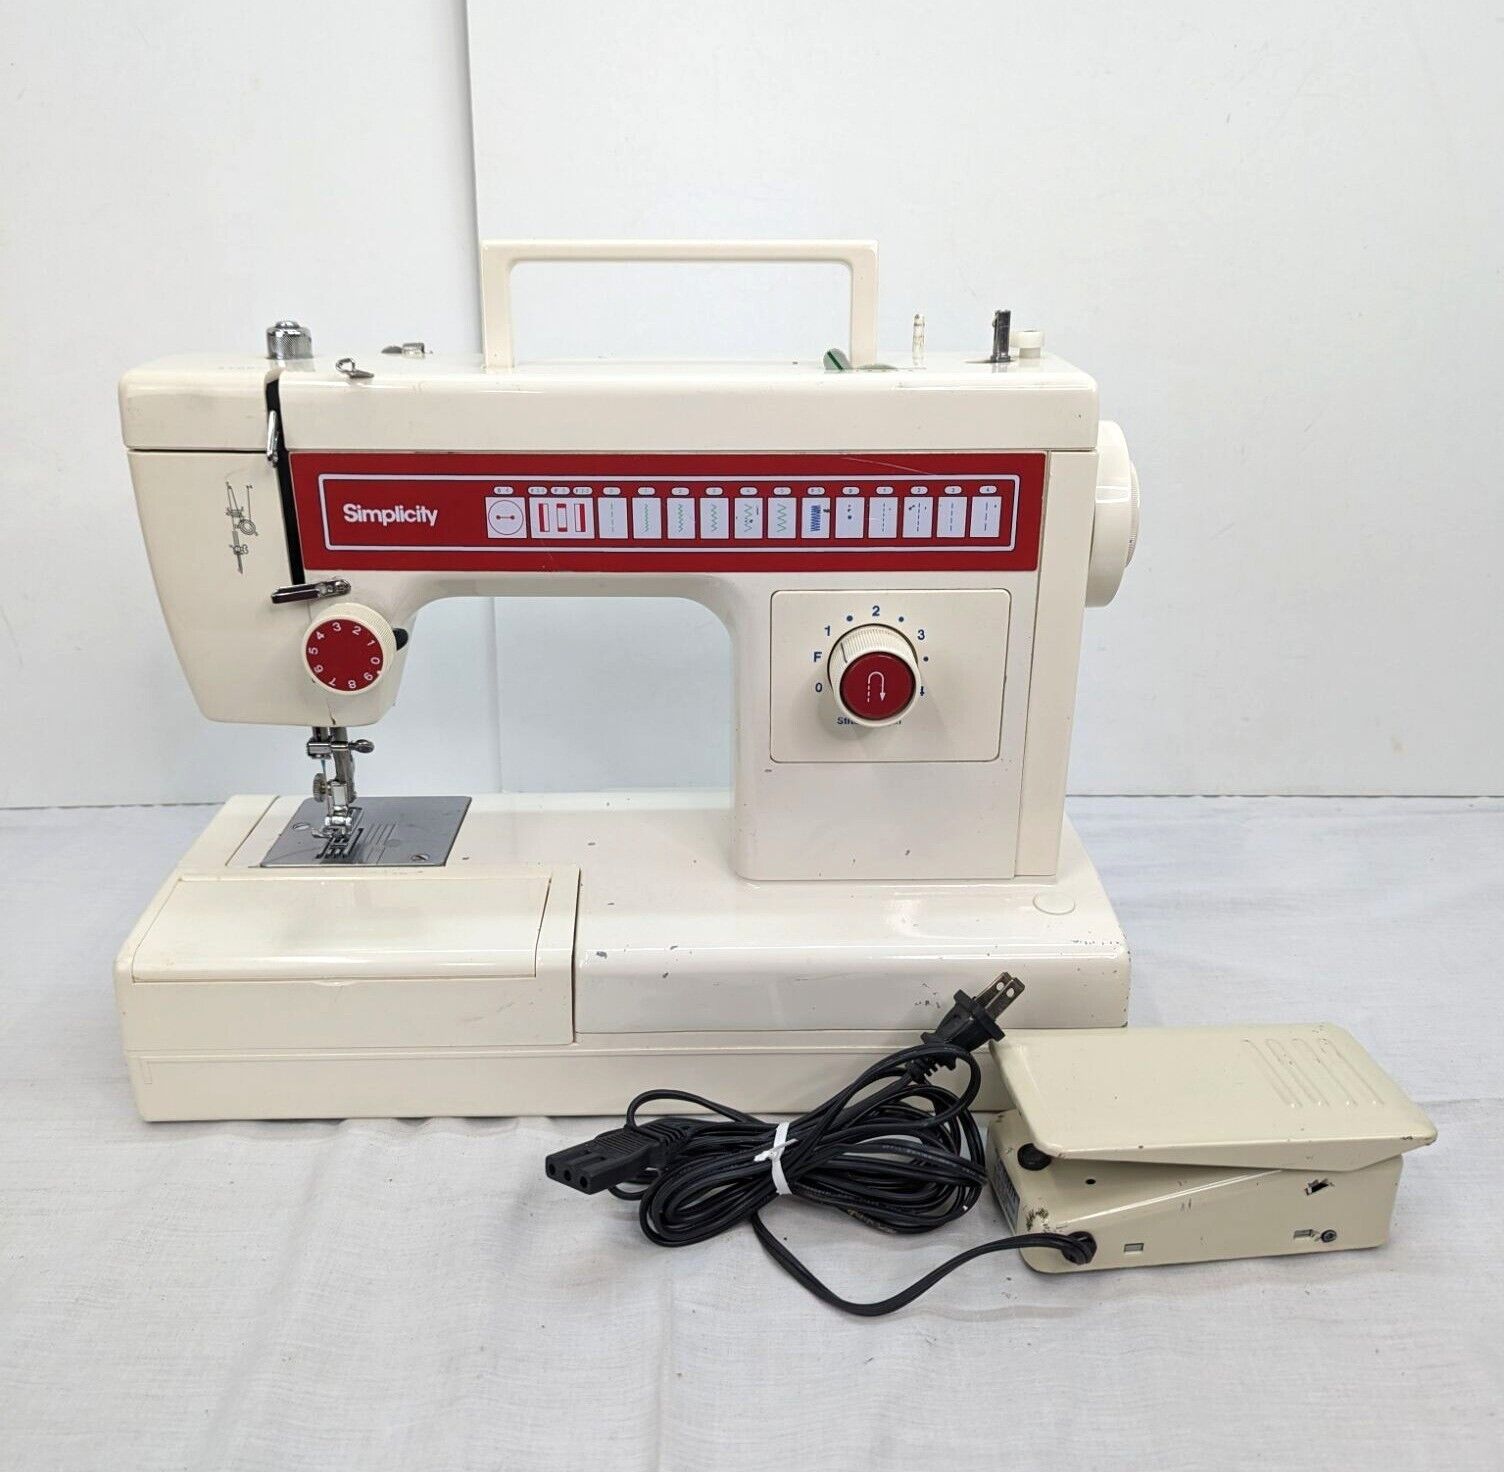 Simplicity Sewing Machine White Model No SL1200 Tacony Corporation Preowned